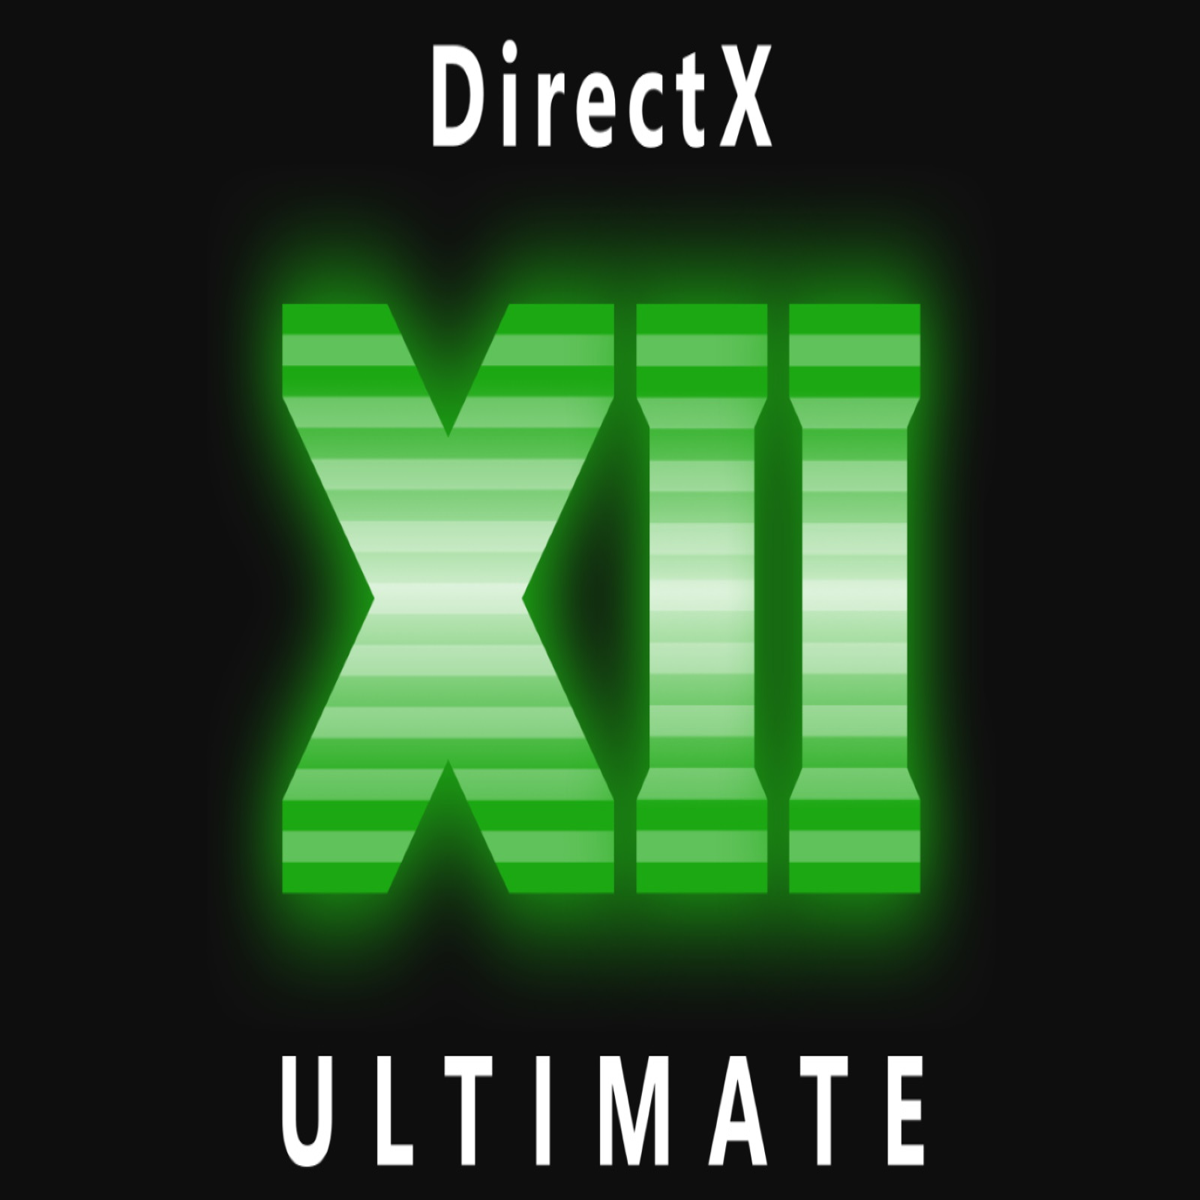 Microsoft Announces DirectX 12 Ultimate: A New Standard for Next